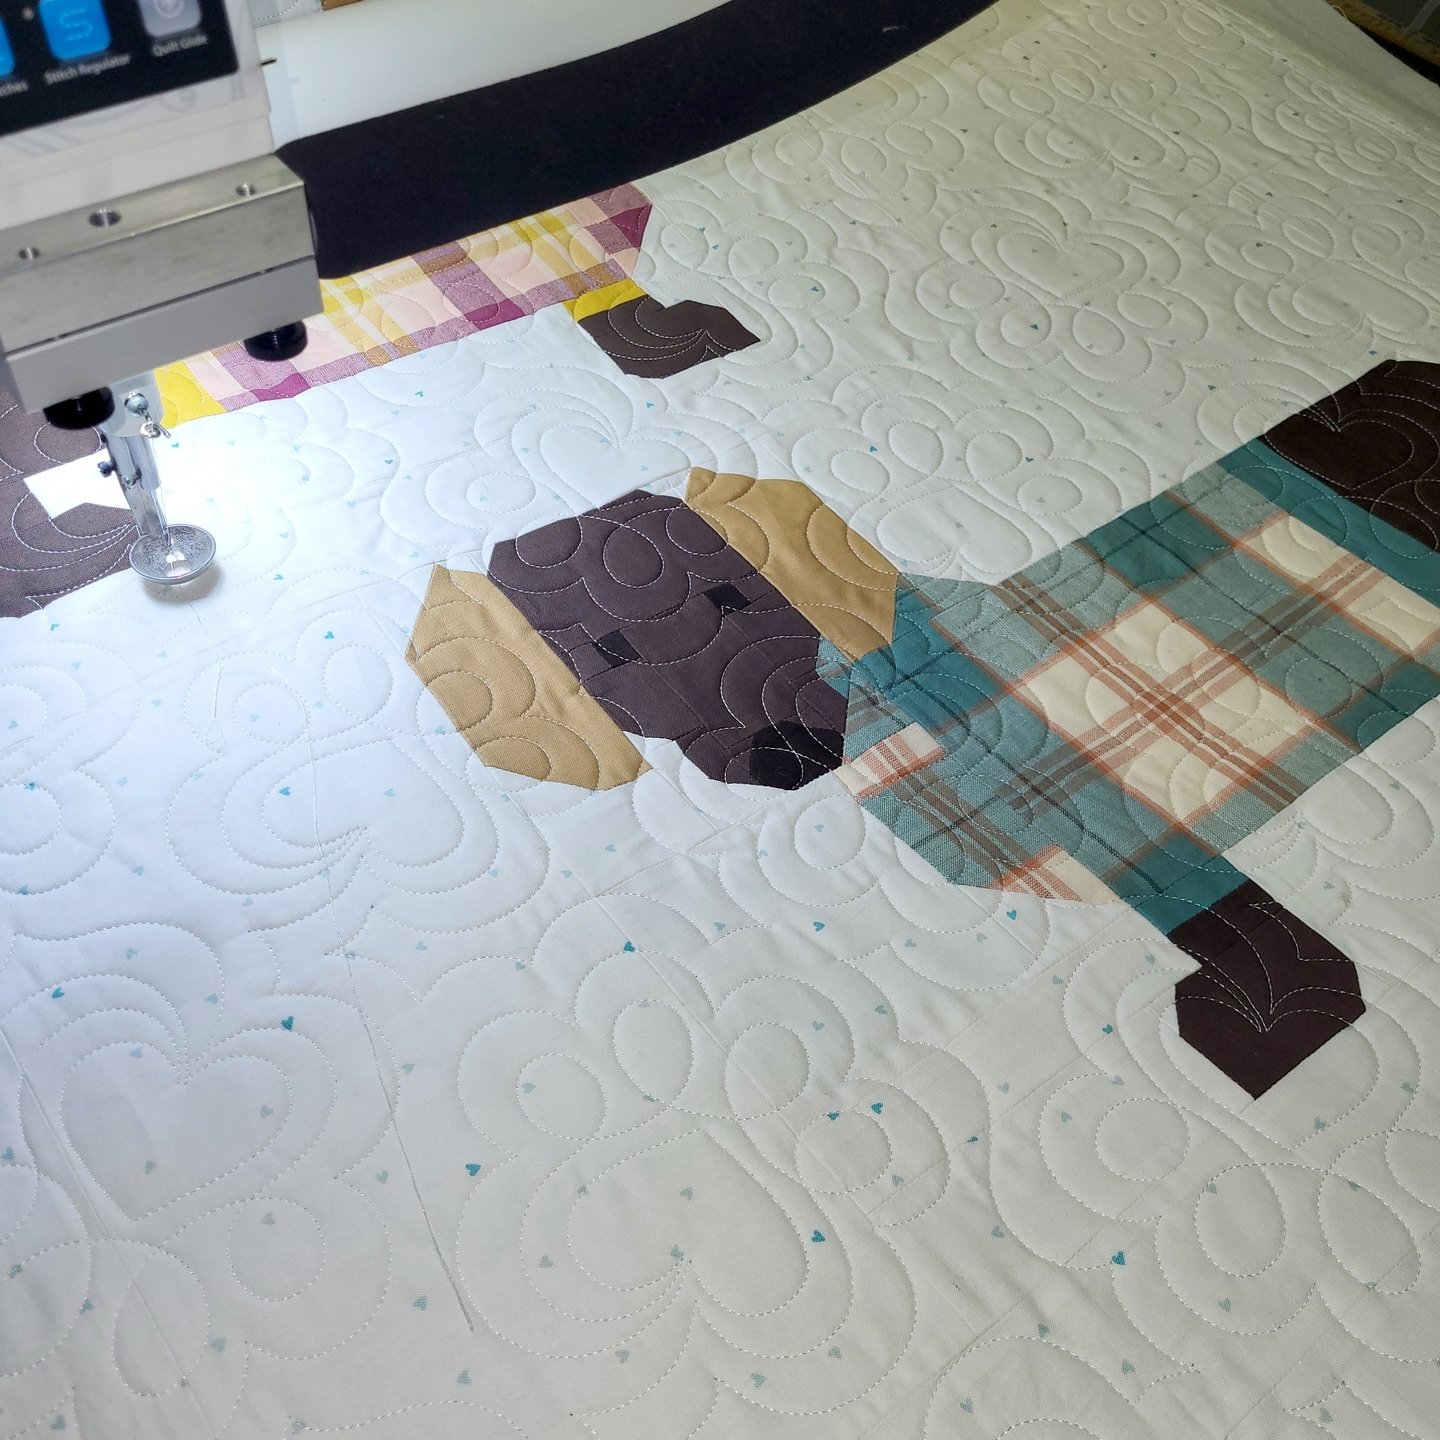 These little doggies in flannel shirts are so so cute!!

I couldn't wait to see Jessica's quilt when I found out that it was a Dogs in Sweaters quilt! It did not disappoint!

For the quilting, Jessica chose Loving Paws, which is just perfect for this